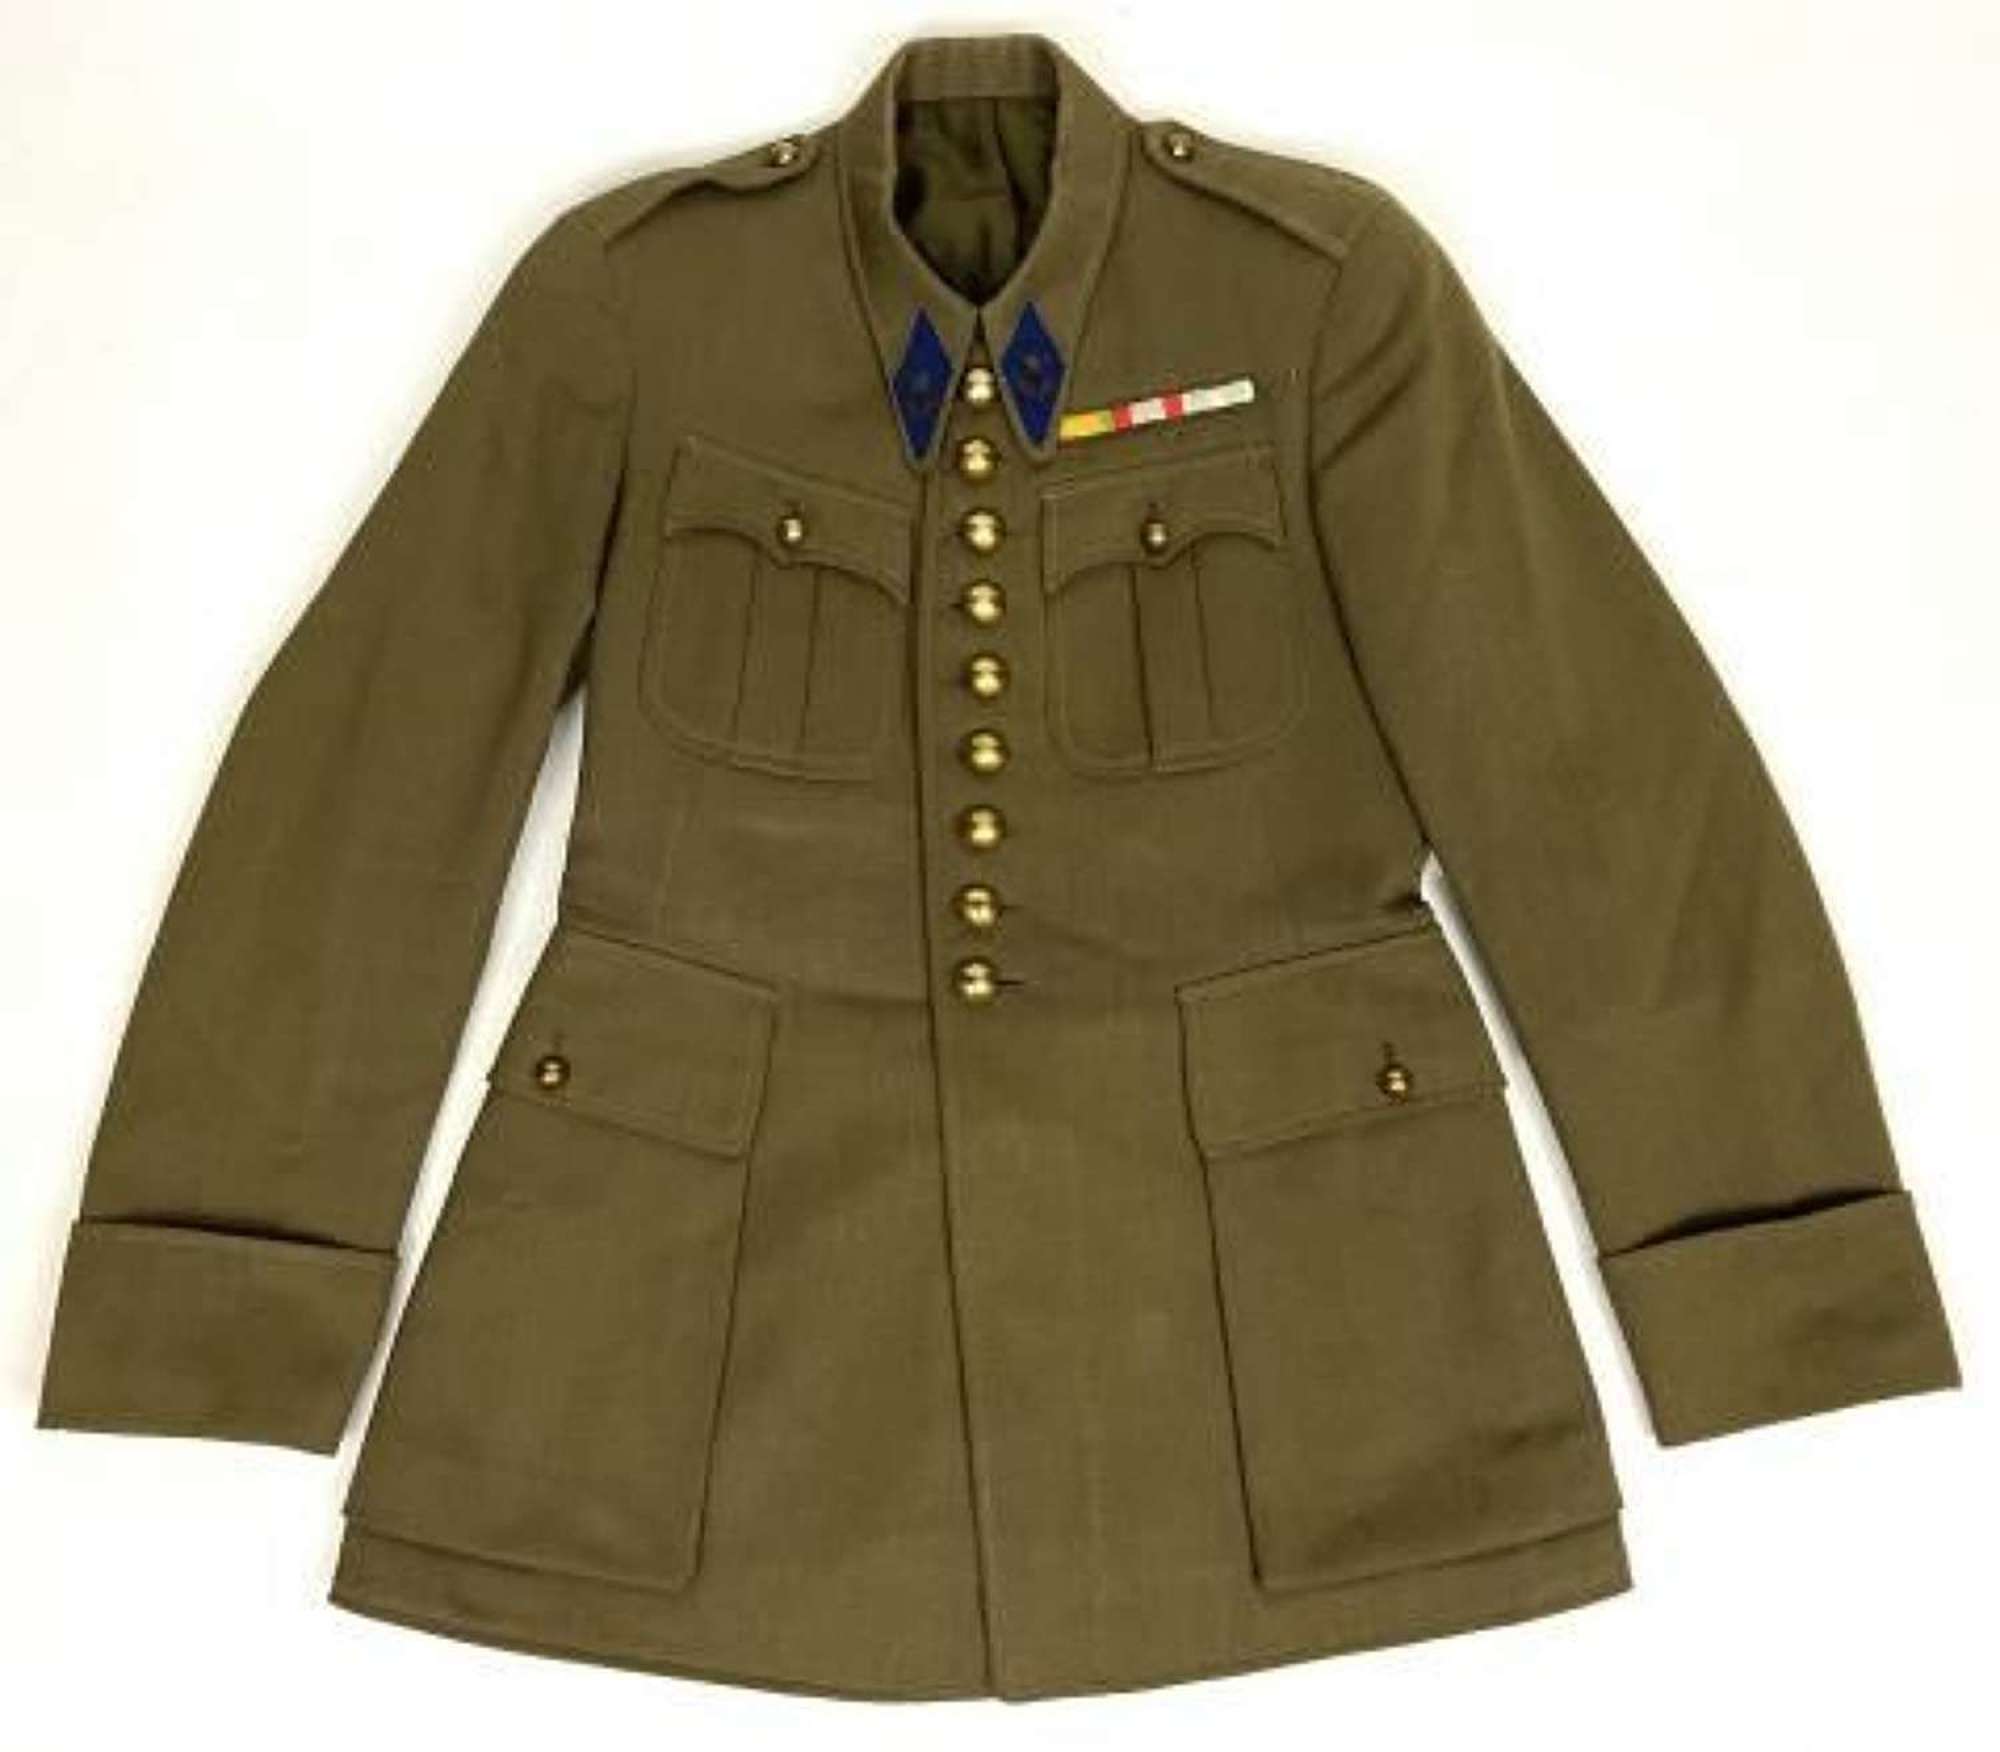 Original 1936 Dated French Army Officers Jacket